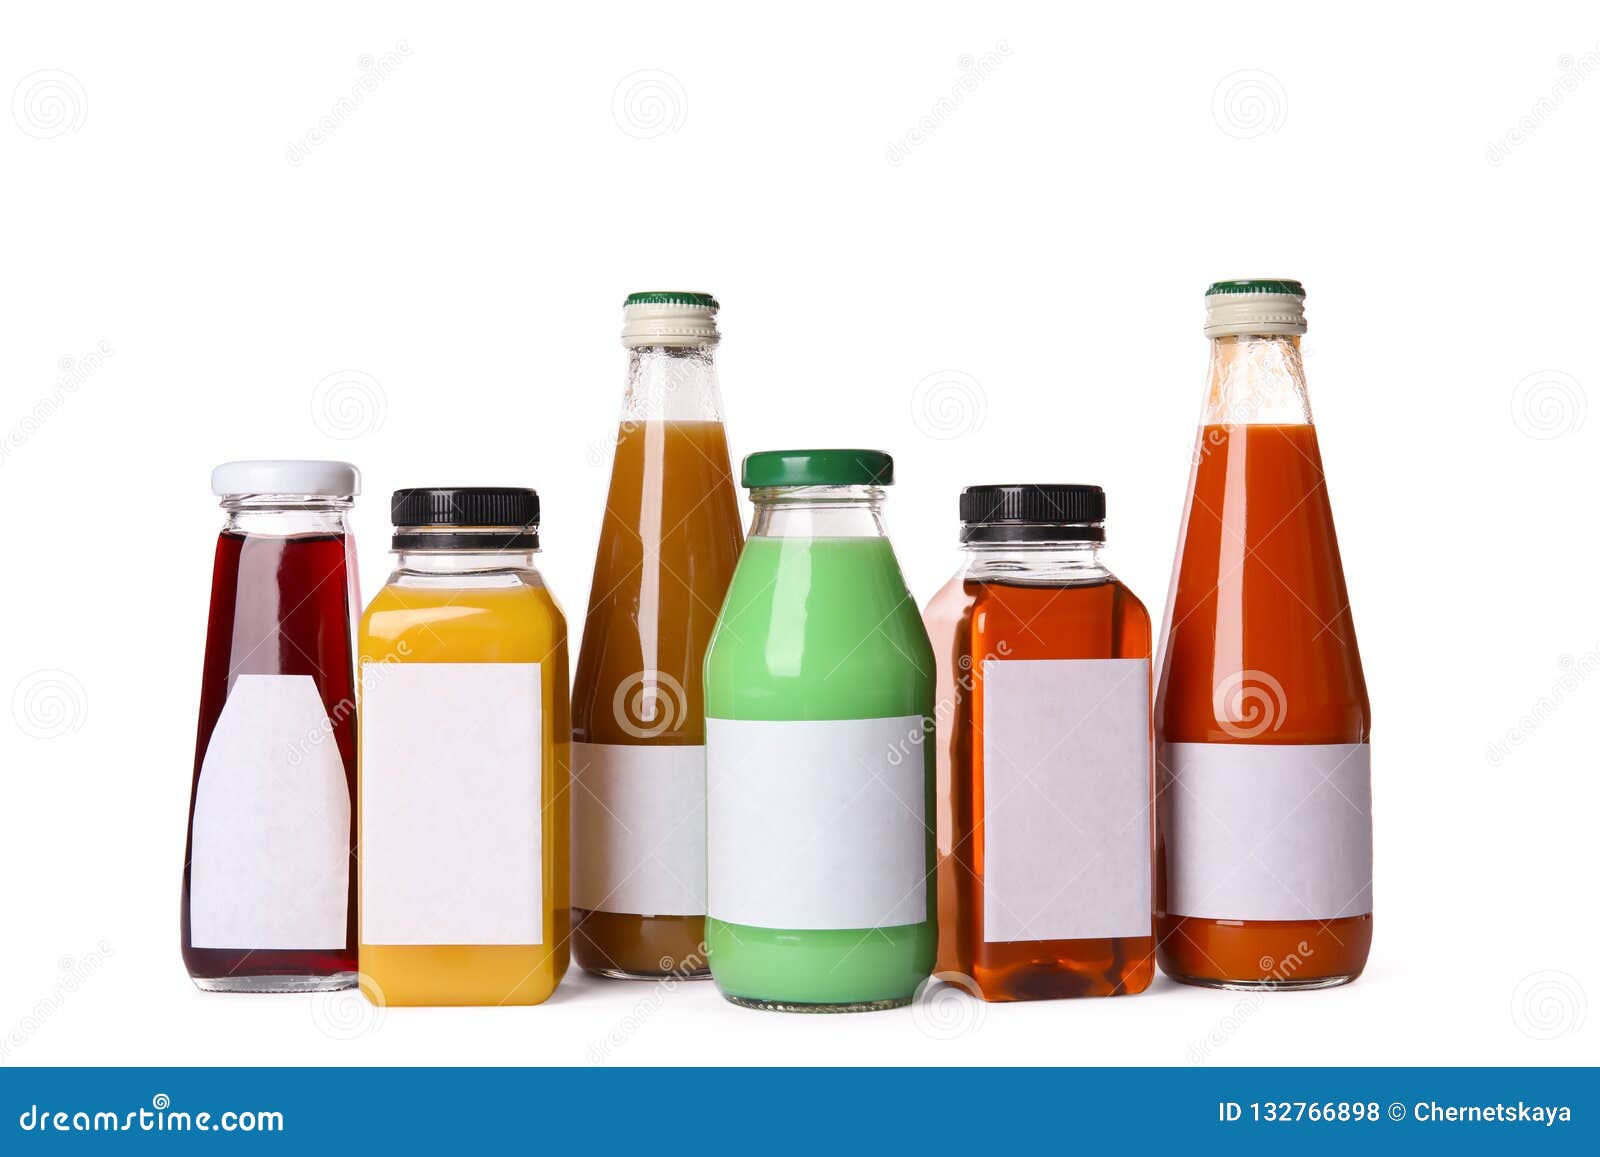 tasty drinks in bottles with blank labels on white background